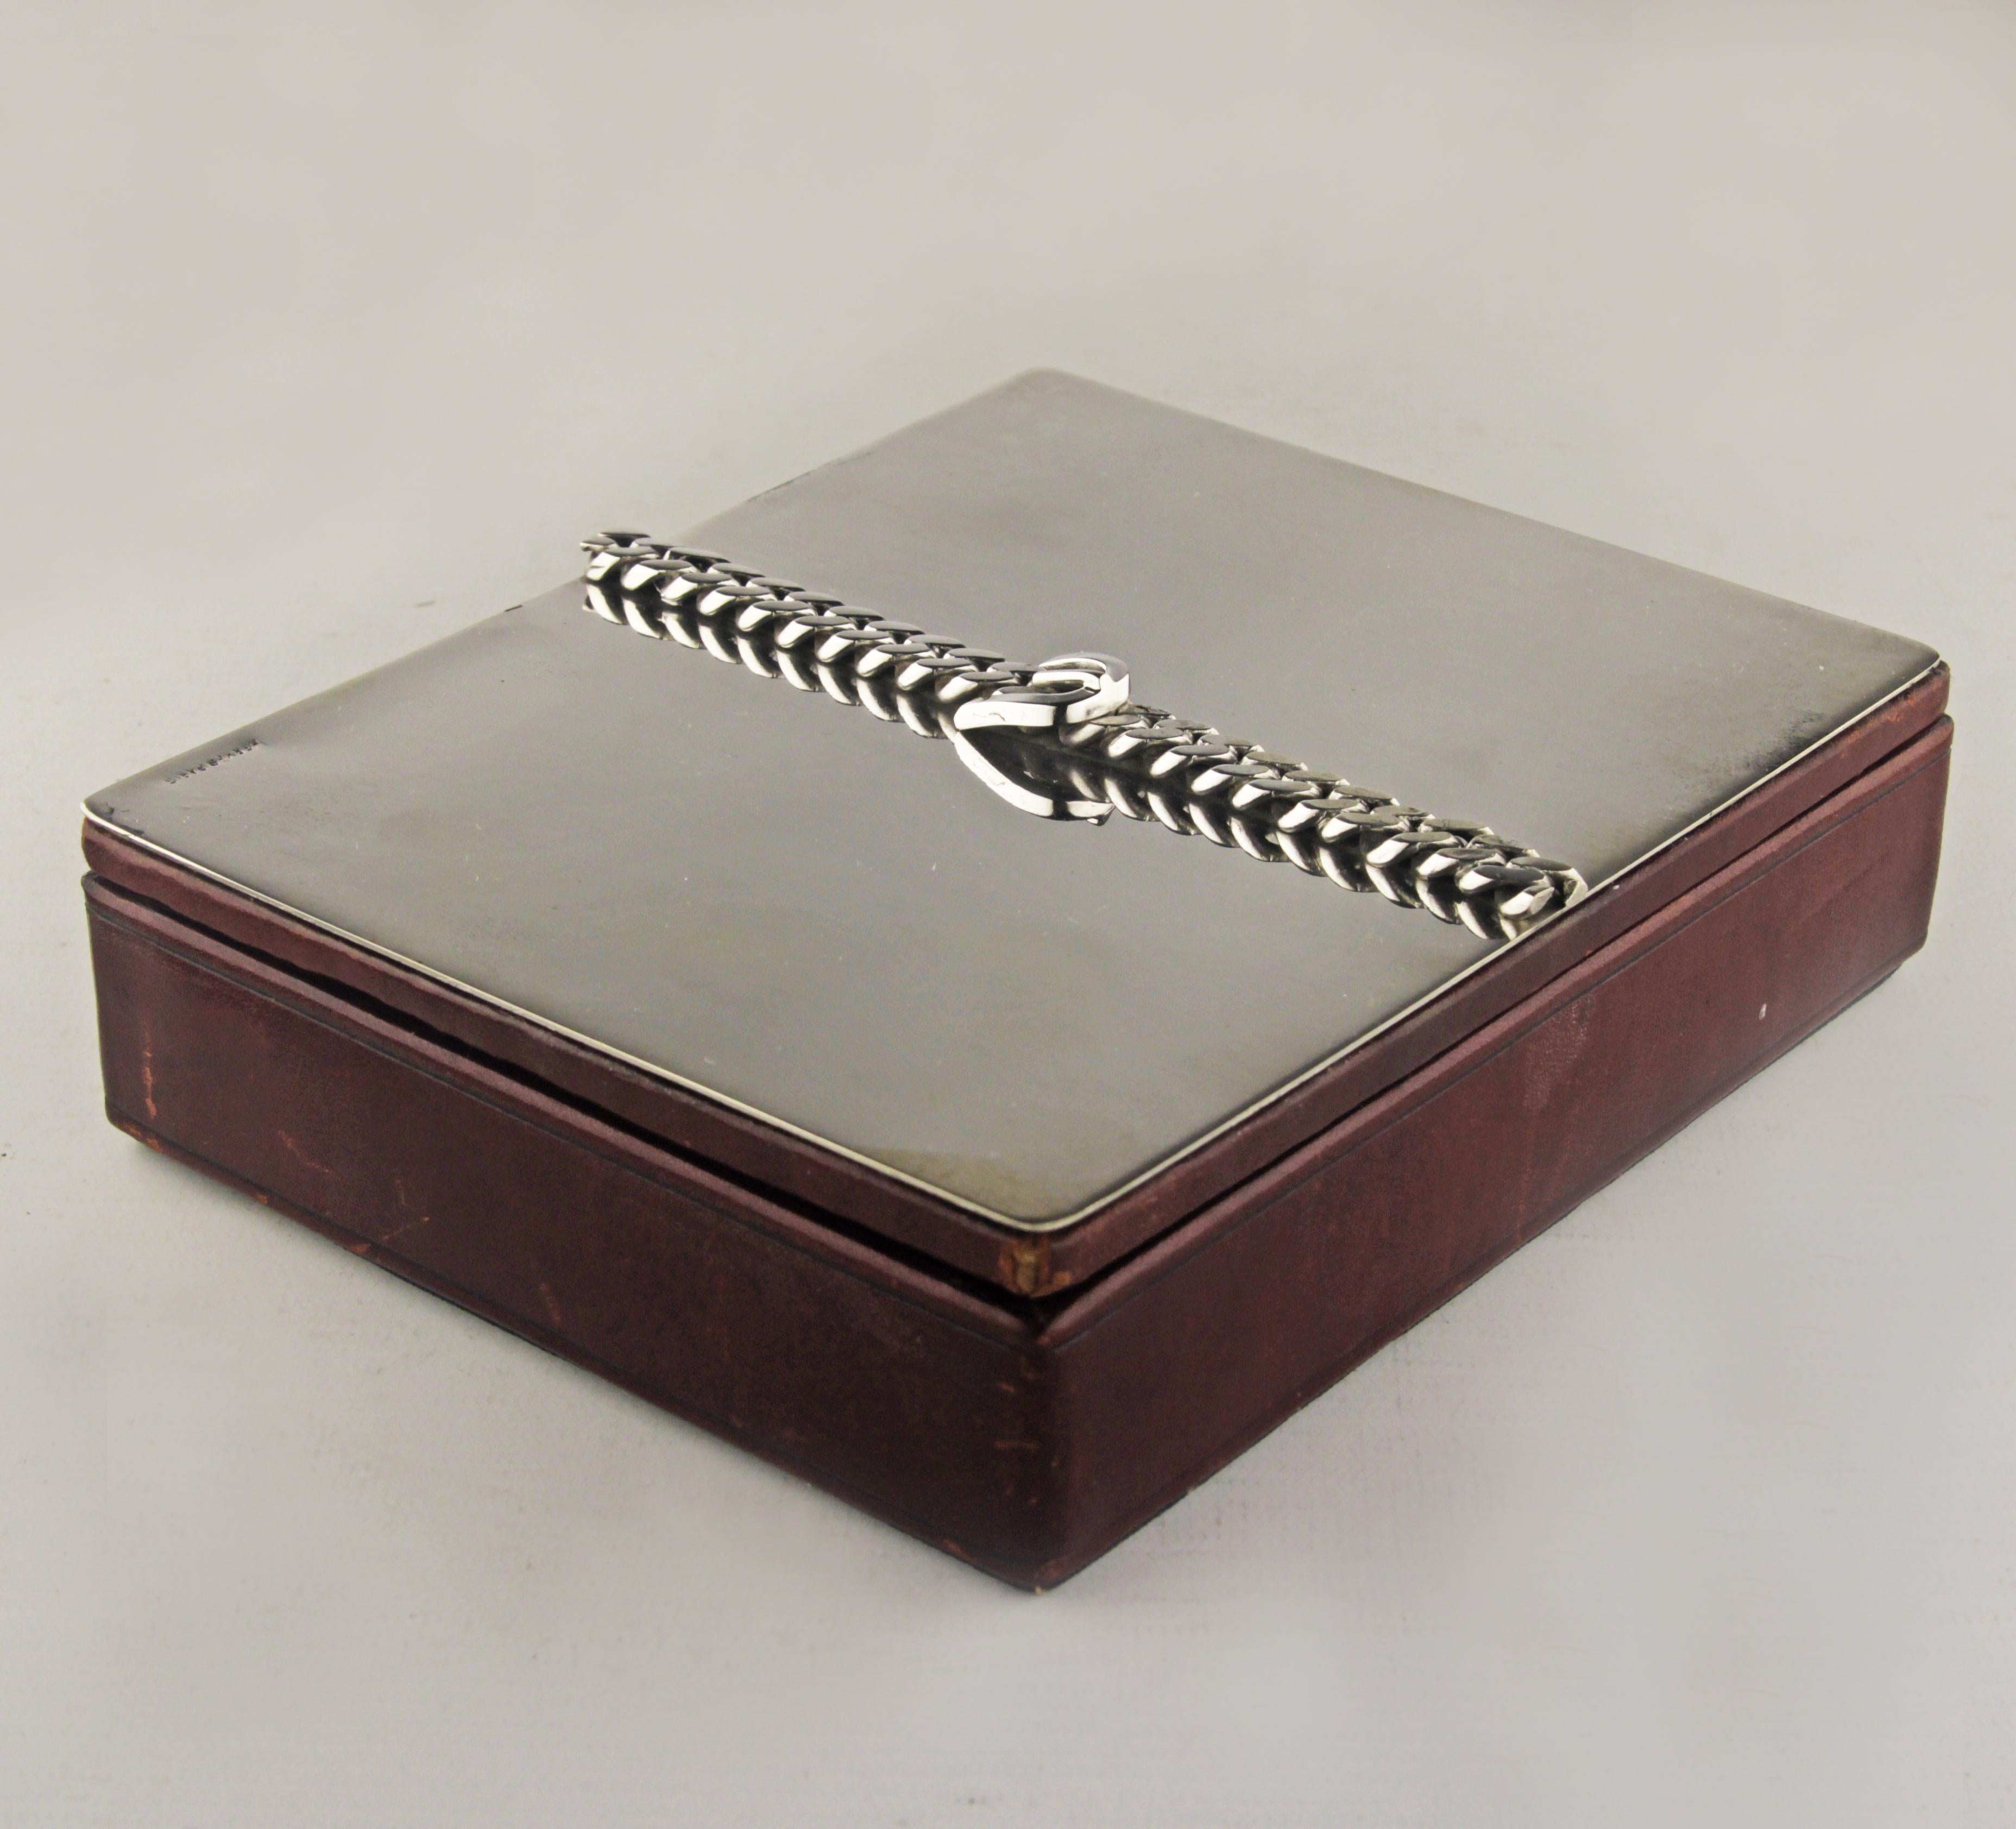 Mid-20th century wooden box with silver buckle lid by french luxury design house Hermès Paris

By: Hermès Paris
Material: fabric, silver, wood
Technique: cast, plated
Date: mid-20th century
Style: Mid-20th Century Modern
Place of origin: